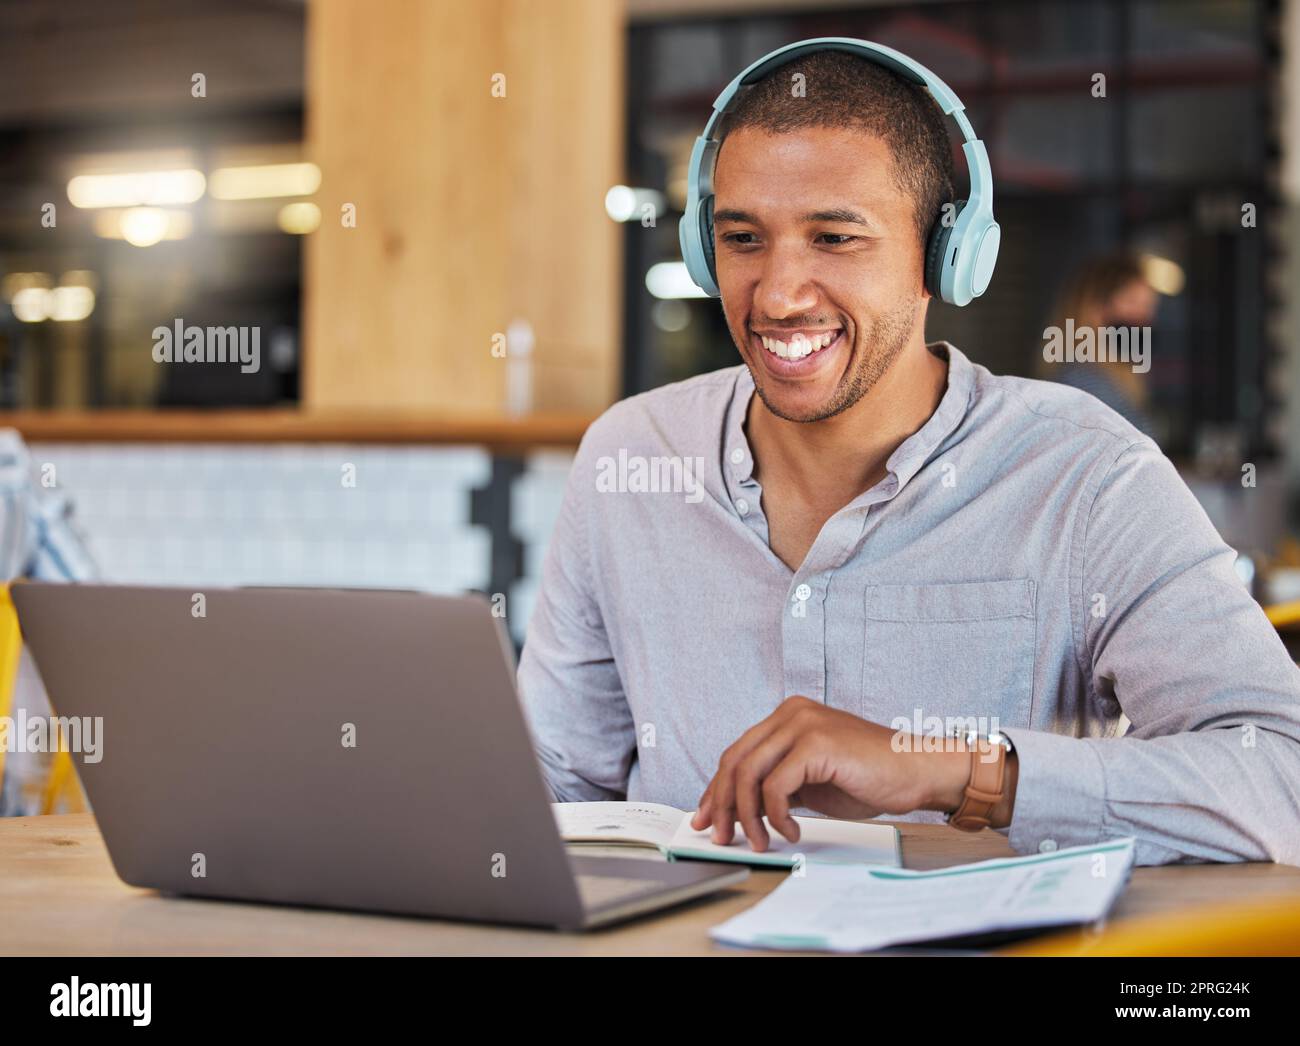 Laptop webinar, workshop training or zoom call meeting in cafe, restaurant or coffee shop with paper. Learning student or headphones man listening to video conference or mentor education presentation Stock Photo